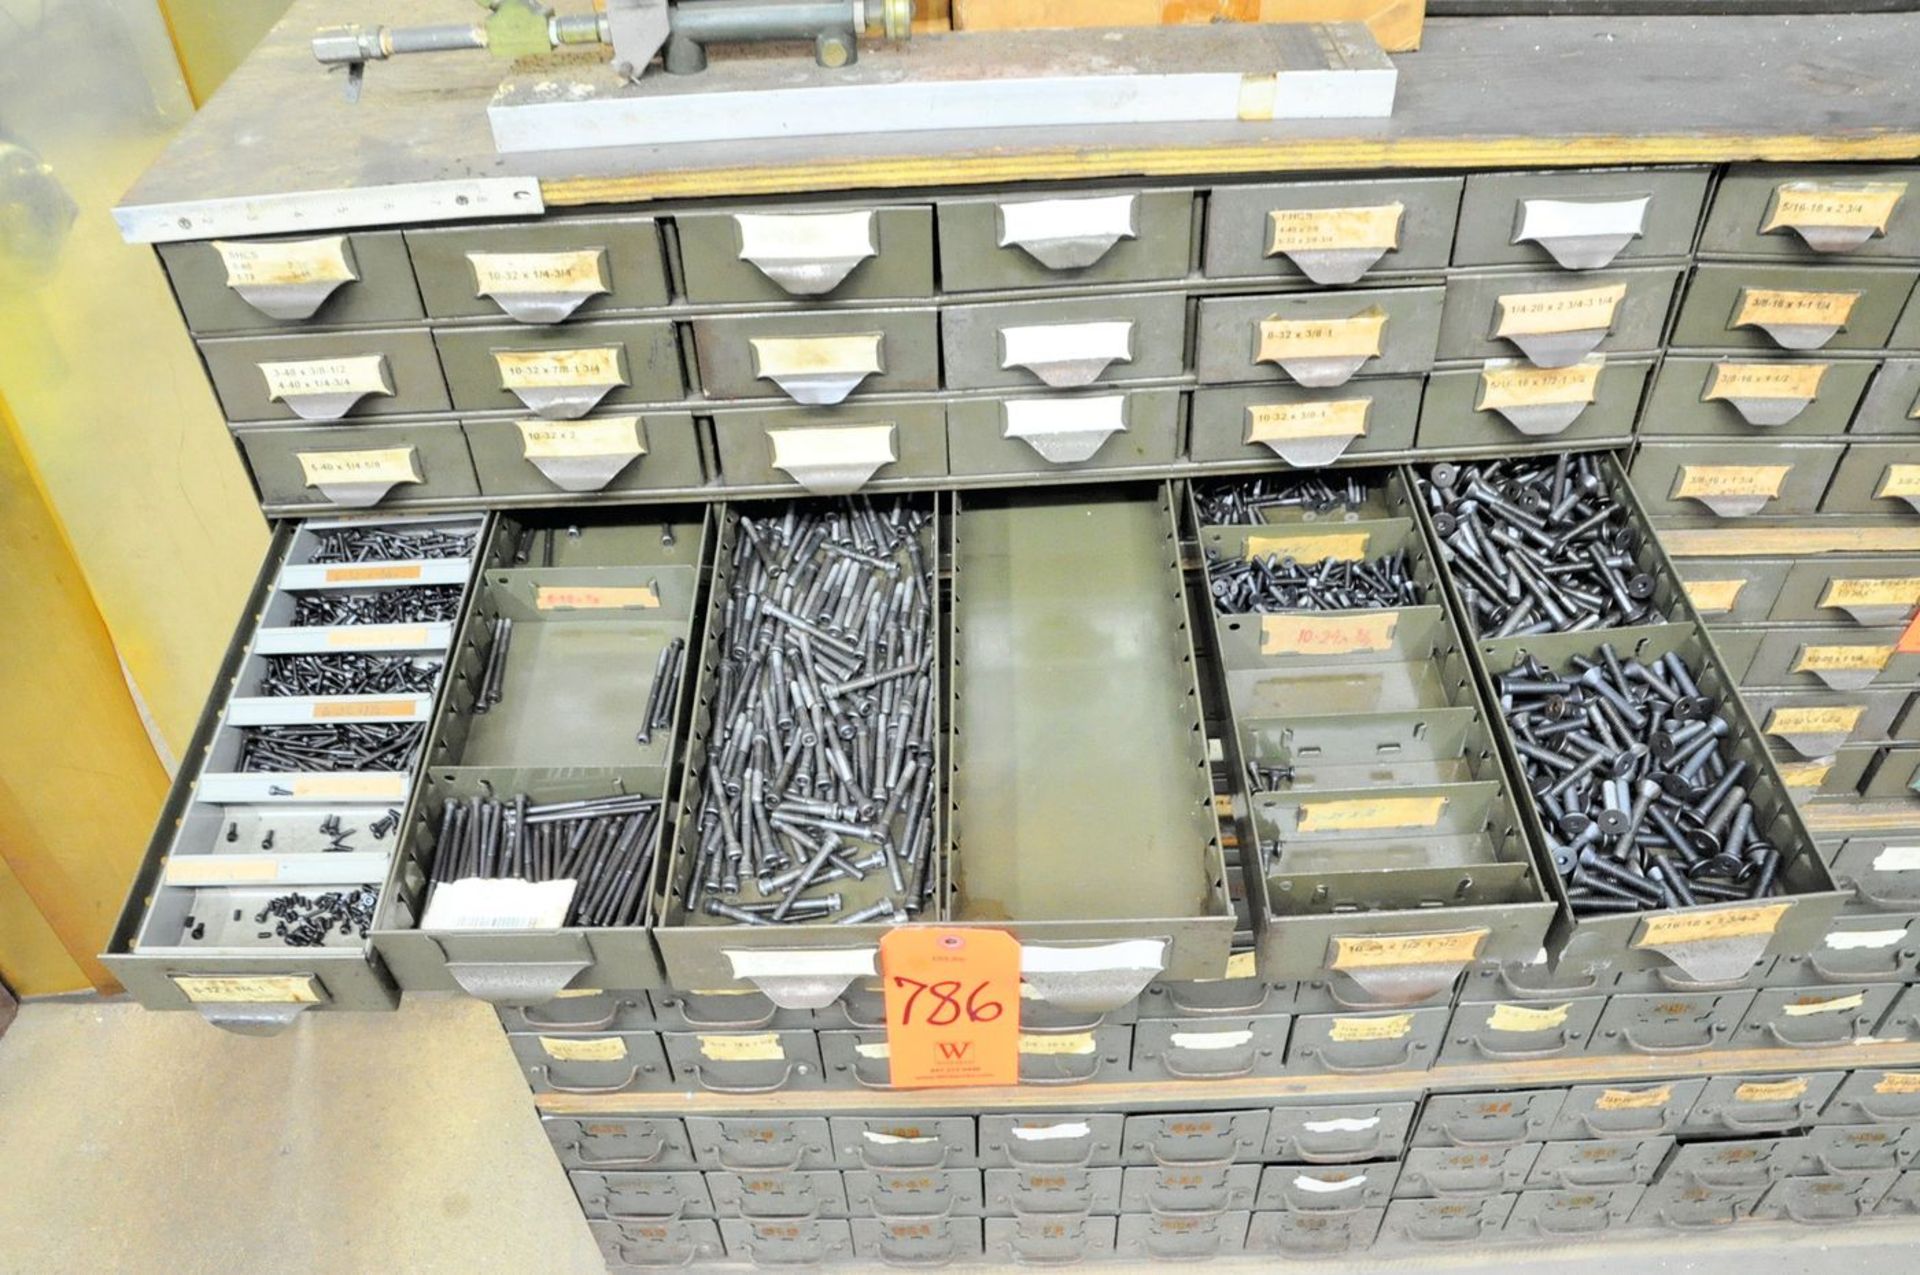 Lot - (84) Organizer Bins with Bolt and Screw Hardware Contents - Image 5 of 15